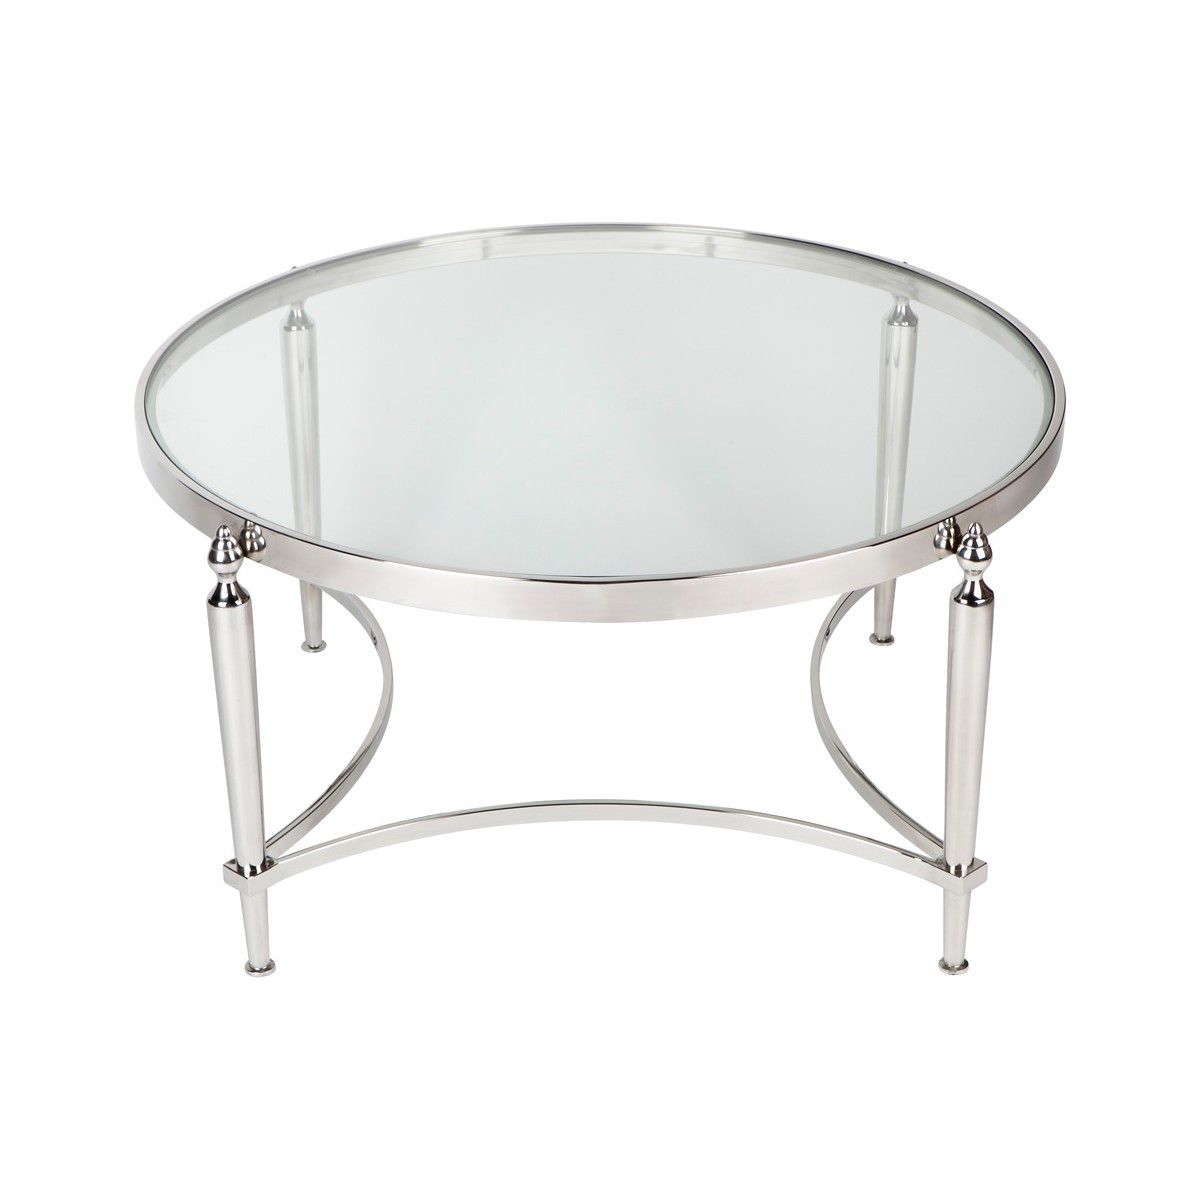 Jacques Glass Top Stainless Steel Round Coffee Table, 97cm, Nickel Inside 2020 Silver Stainless Steel Coffee Tables (View 8 of 10)